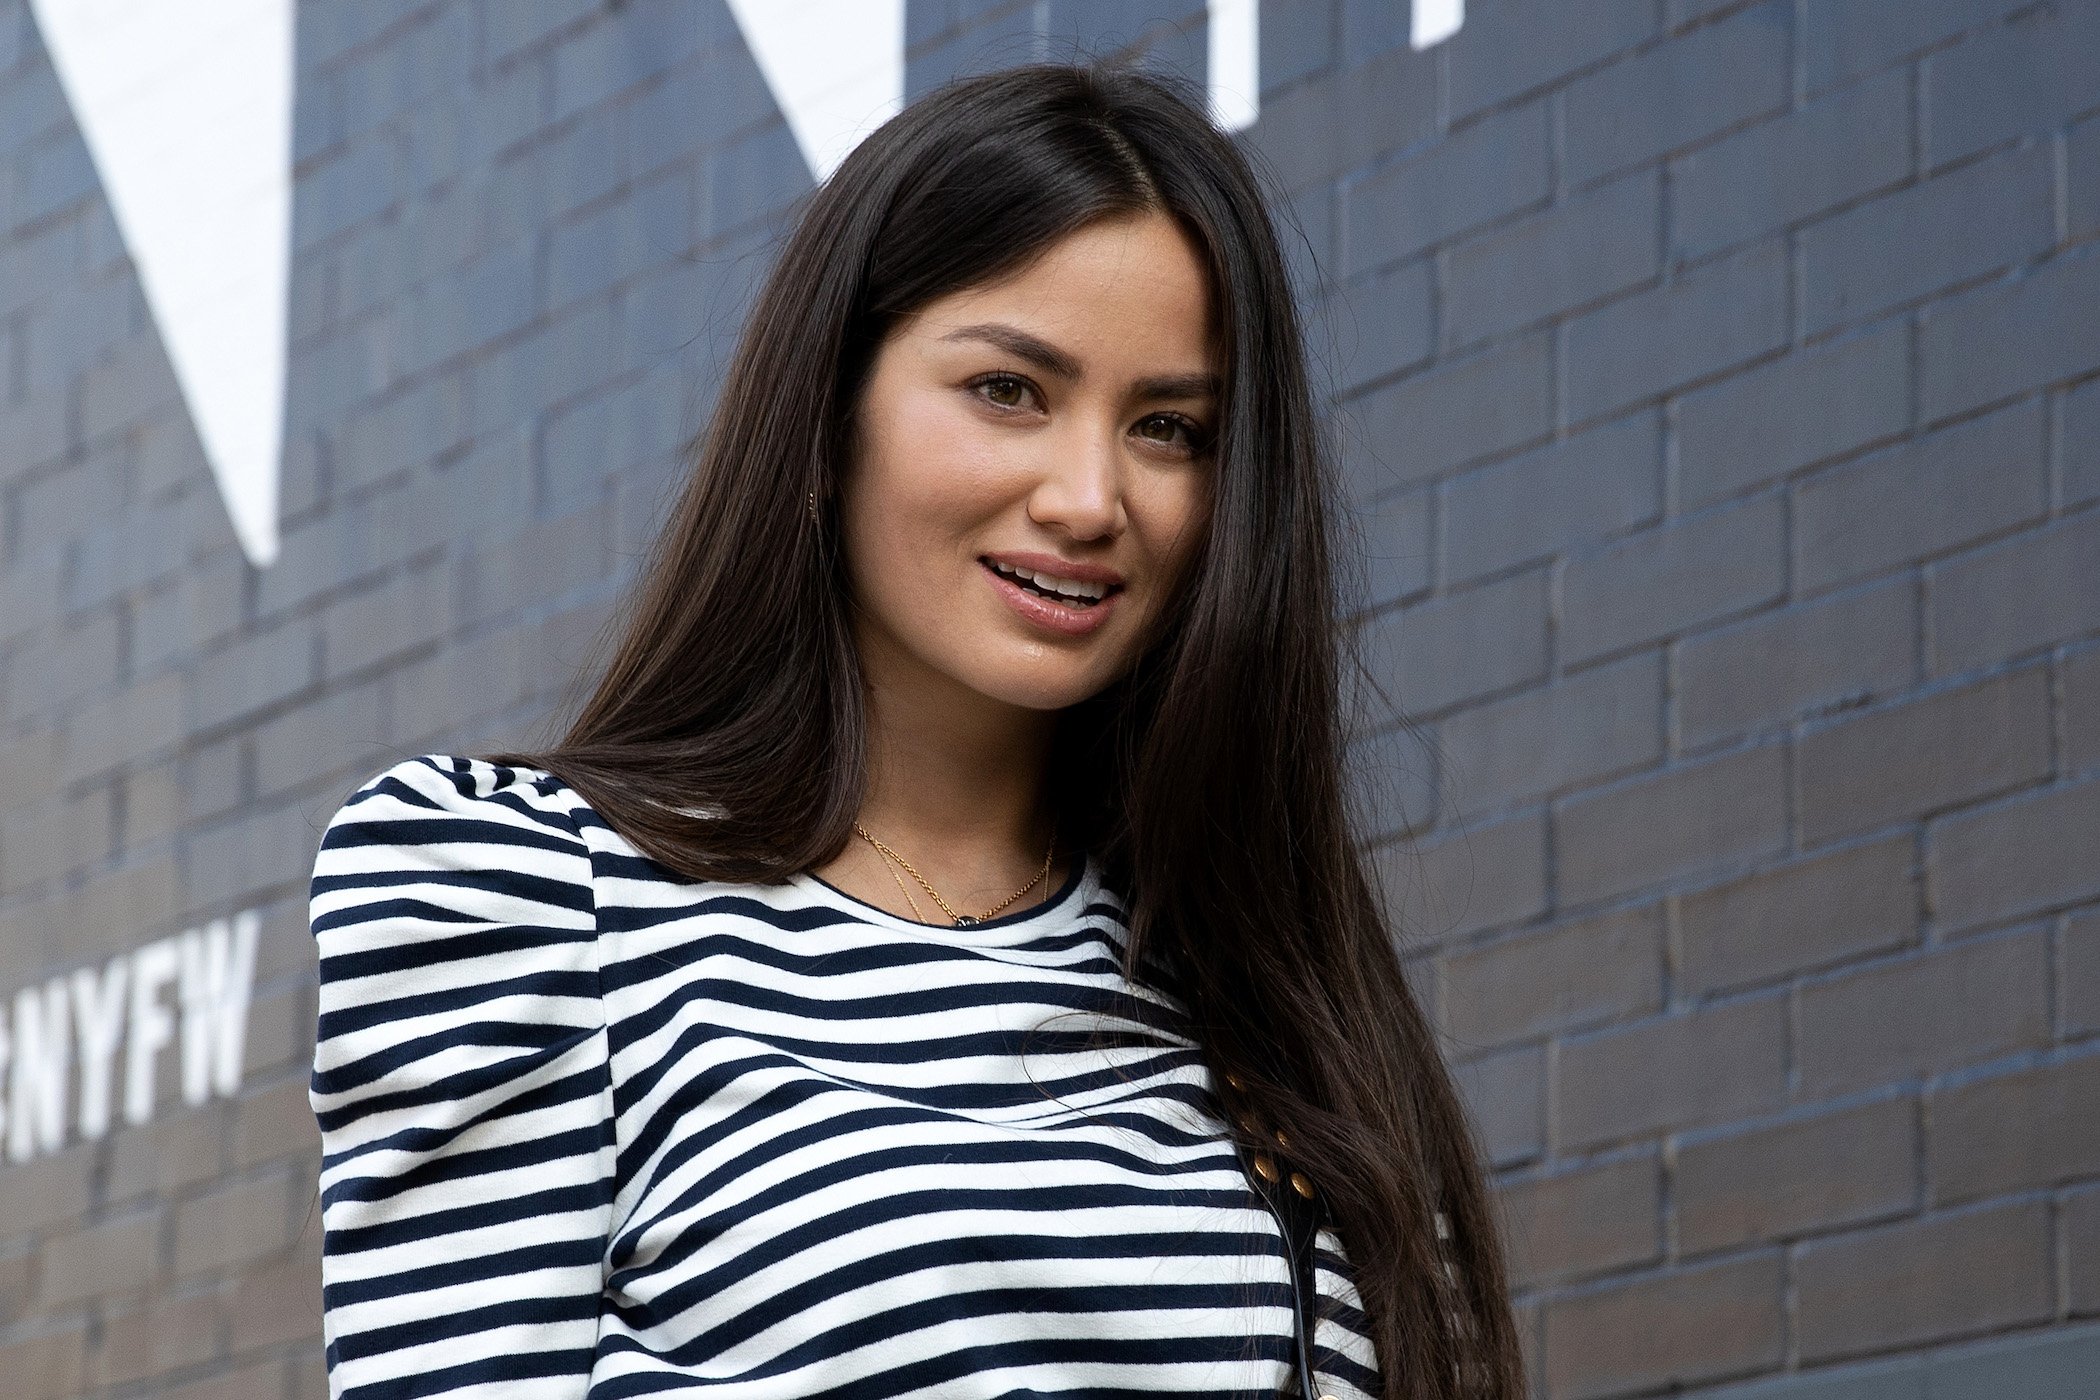 Caila Quinn from 'The Bachelor' smiling while looking at the camera. She's in a striped long-sleeve shirt.